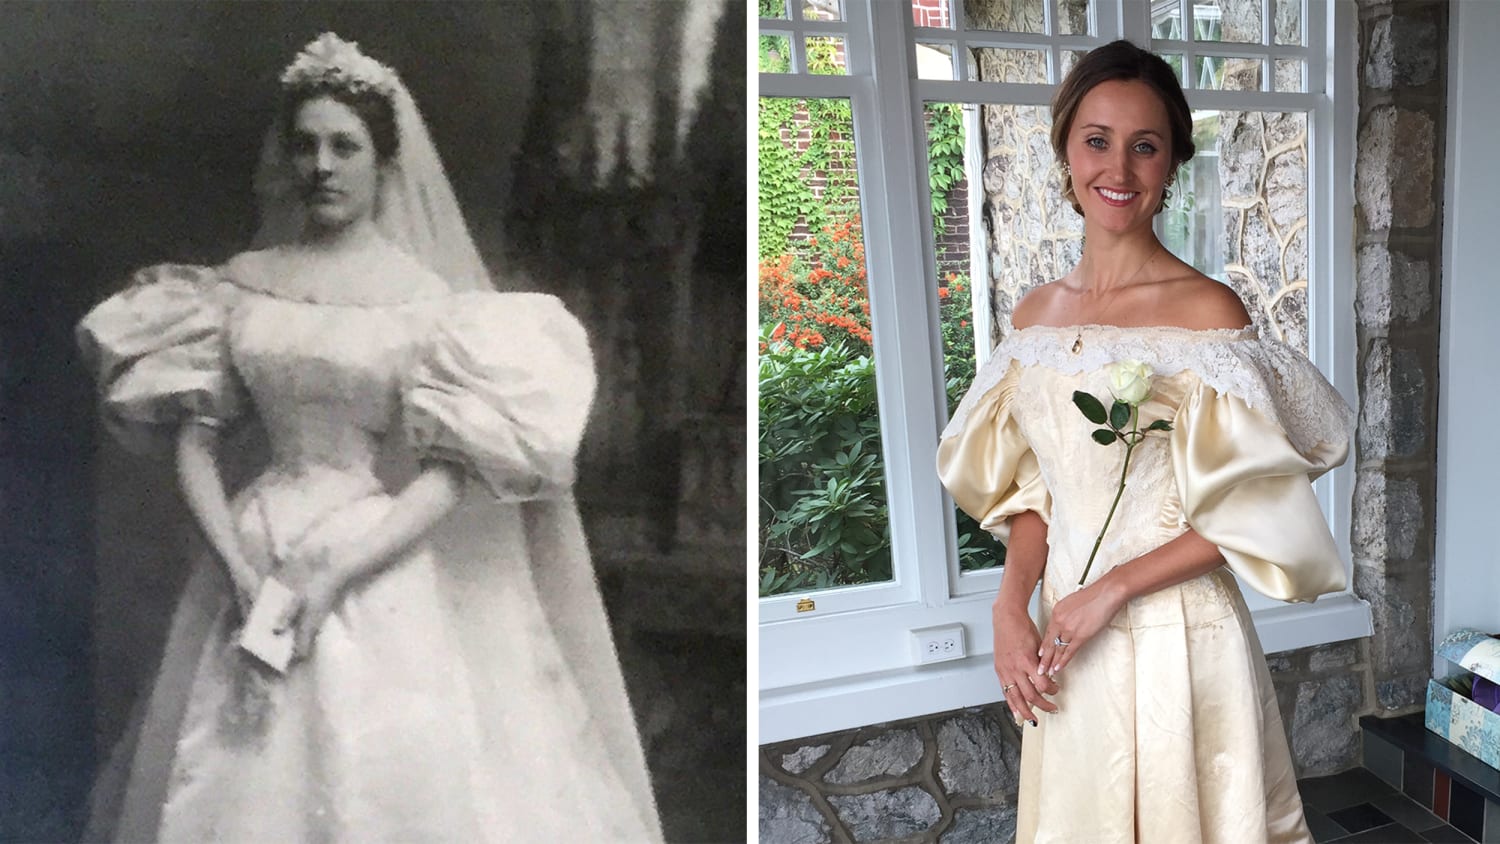 Bride Will Be 11th In Family To Wear 120 Year Old Wedding Dress